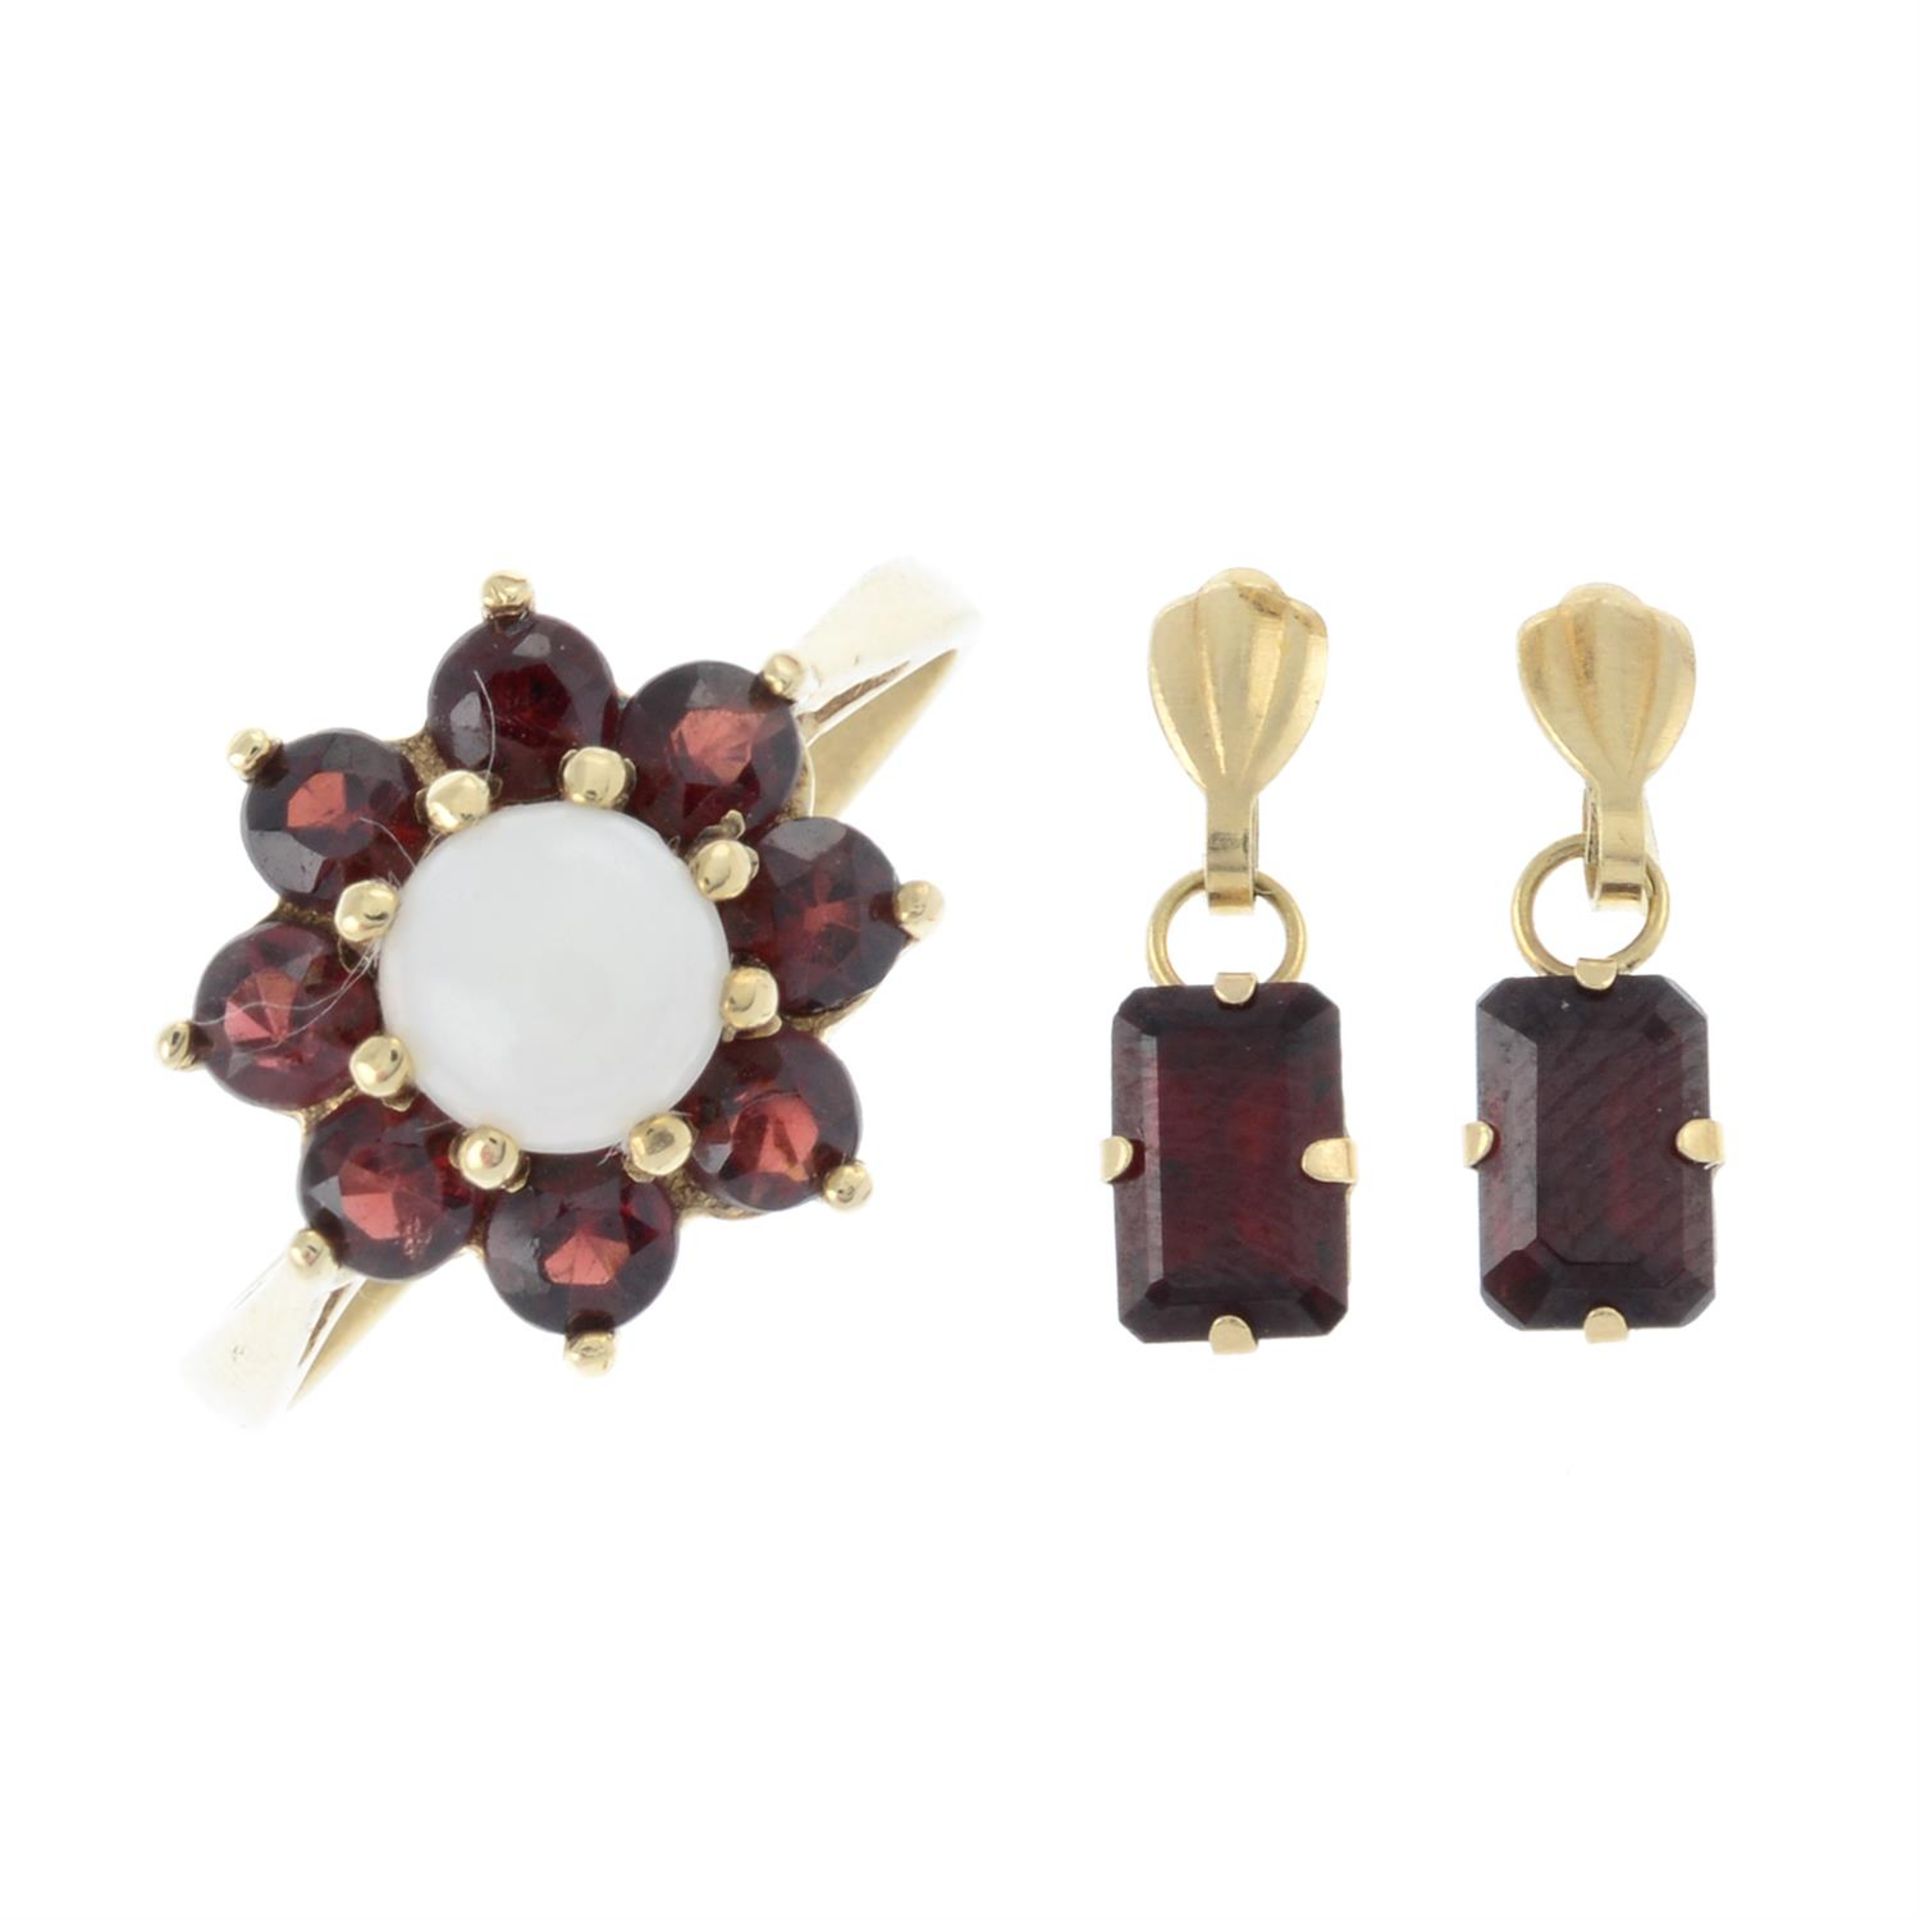 An opal cabochon and garnet cluster ring, together with a pair of garnet drop earrings.